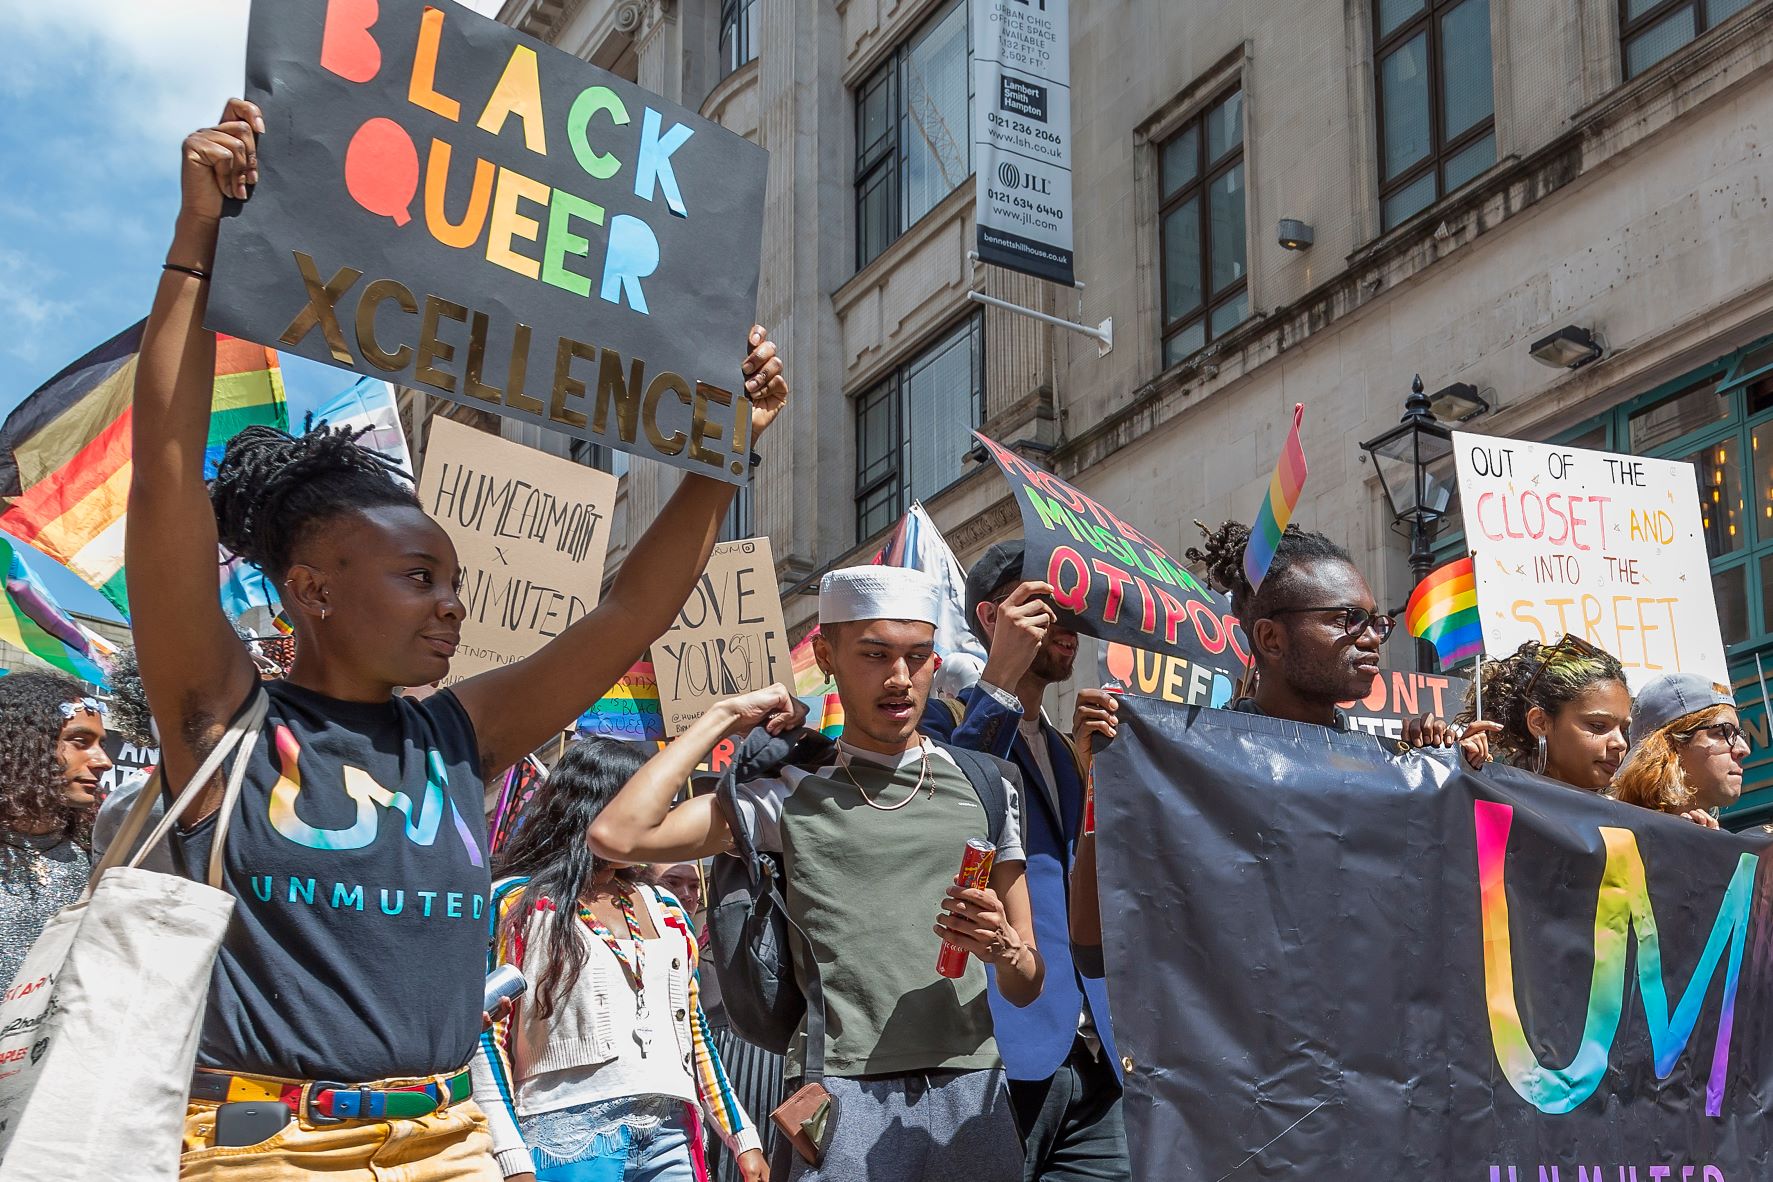 A group walking during a Pride event in Birmingham, UK. They are holding signs that read "Black Queer Excellence" and "Out of the Closet and into the Street."